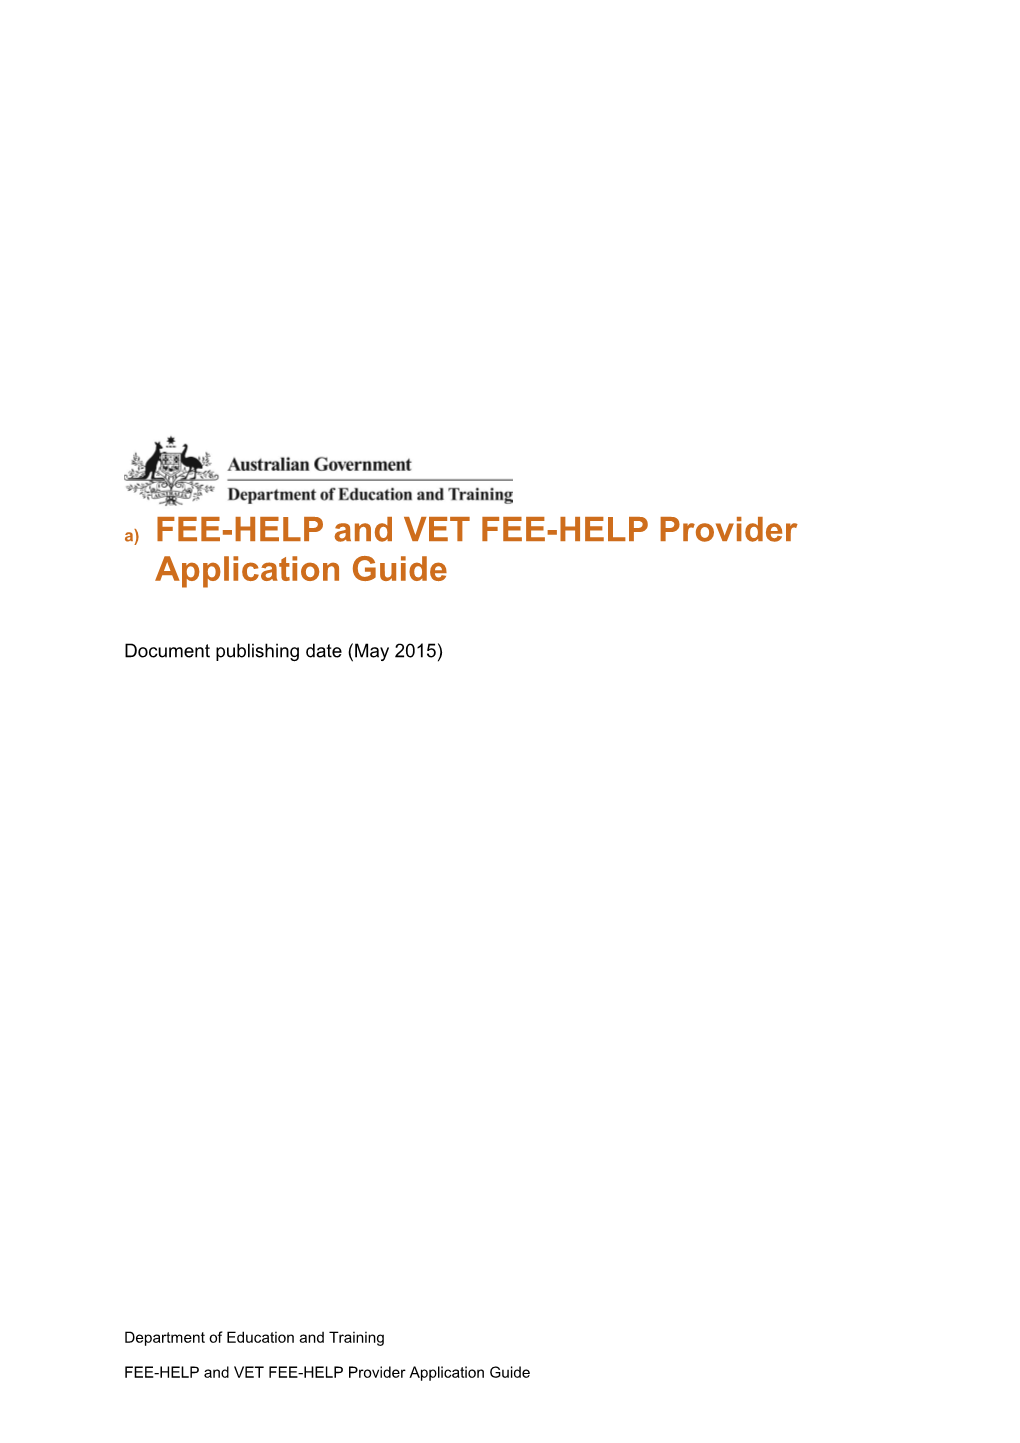 FEE-HELP and VET FEE-HELP Provider Application Guide